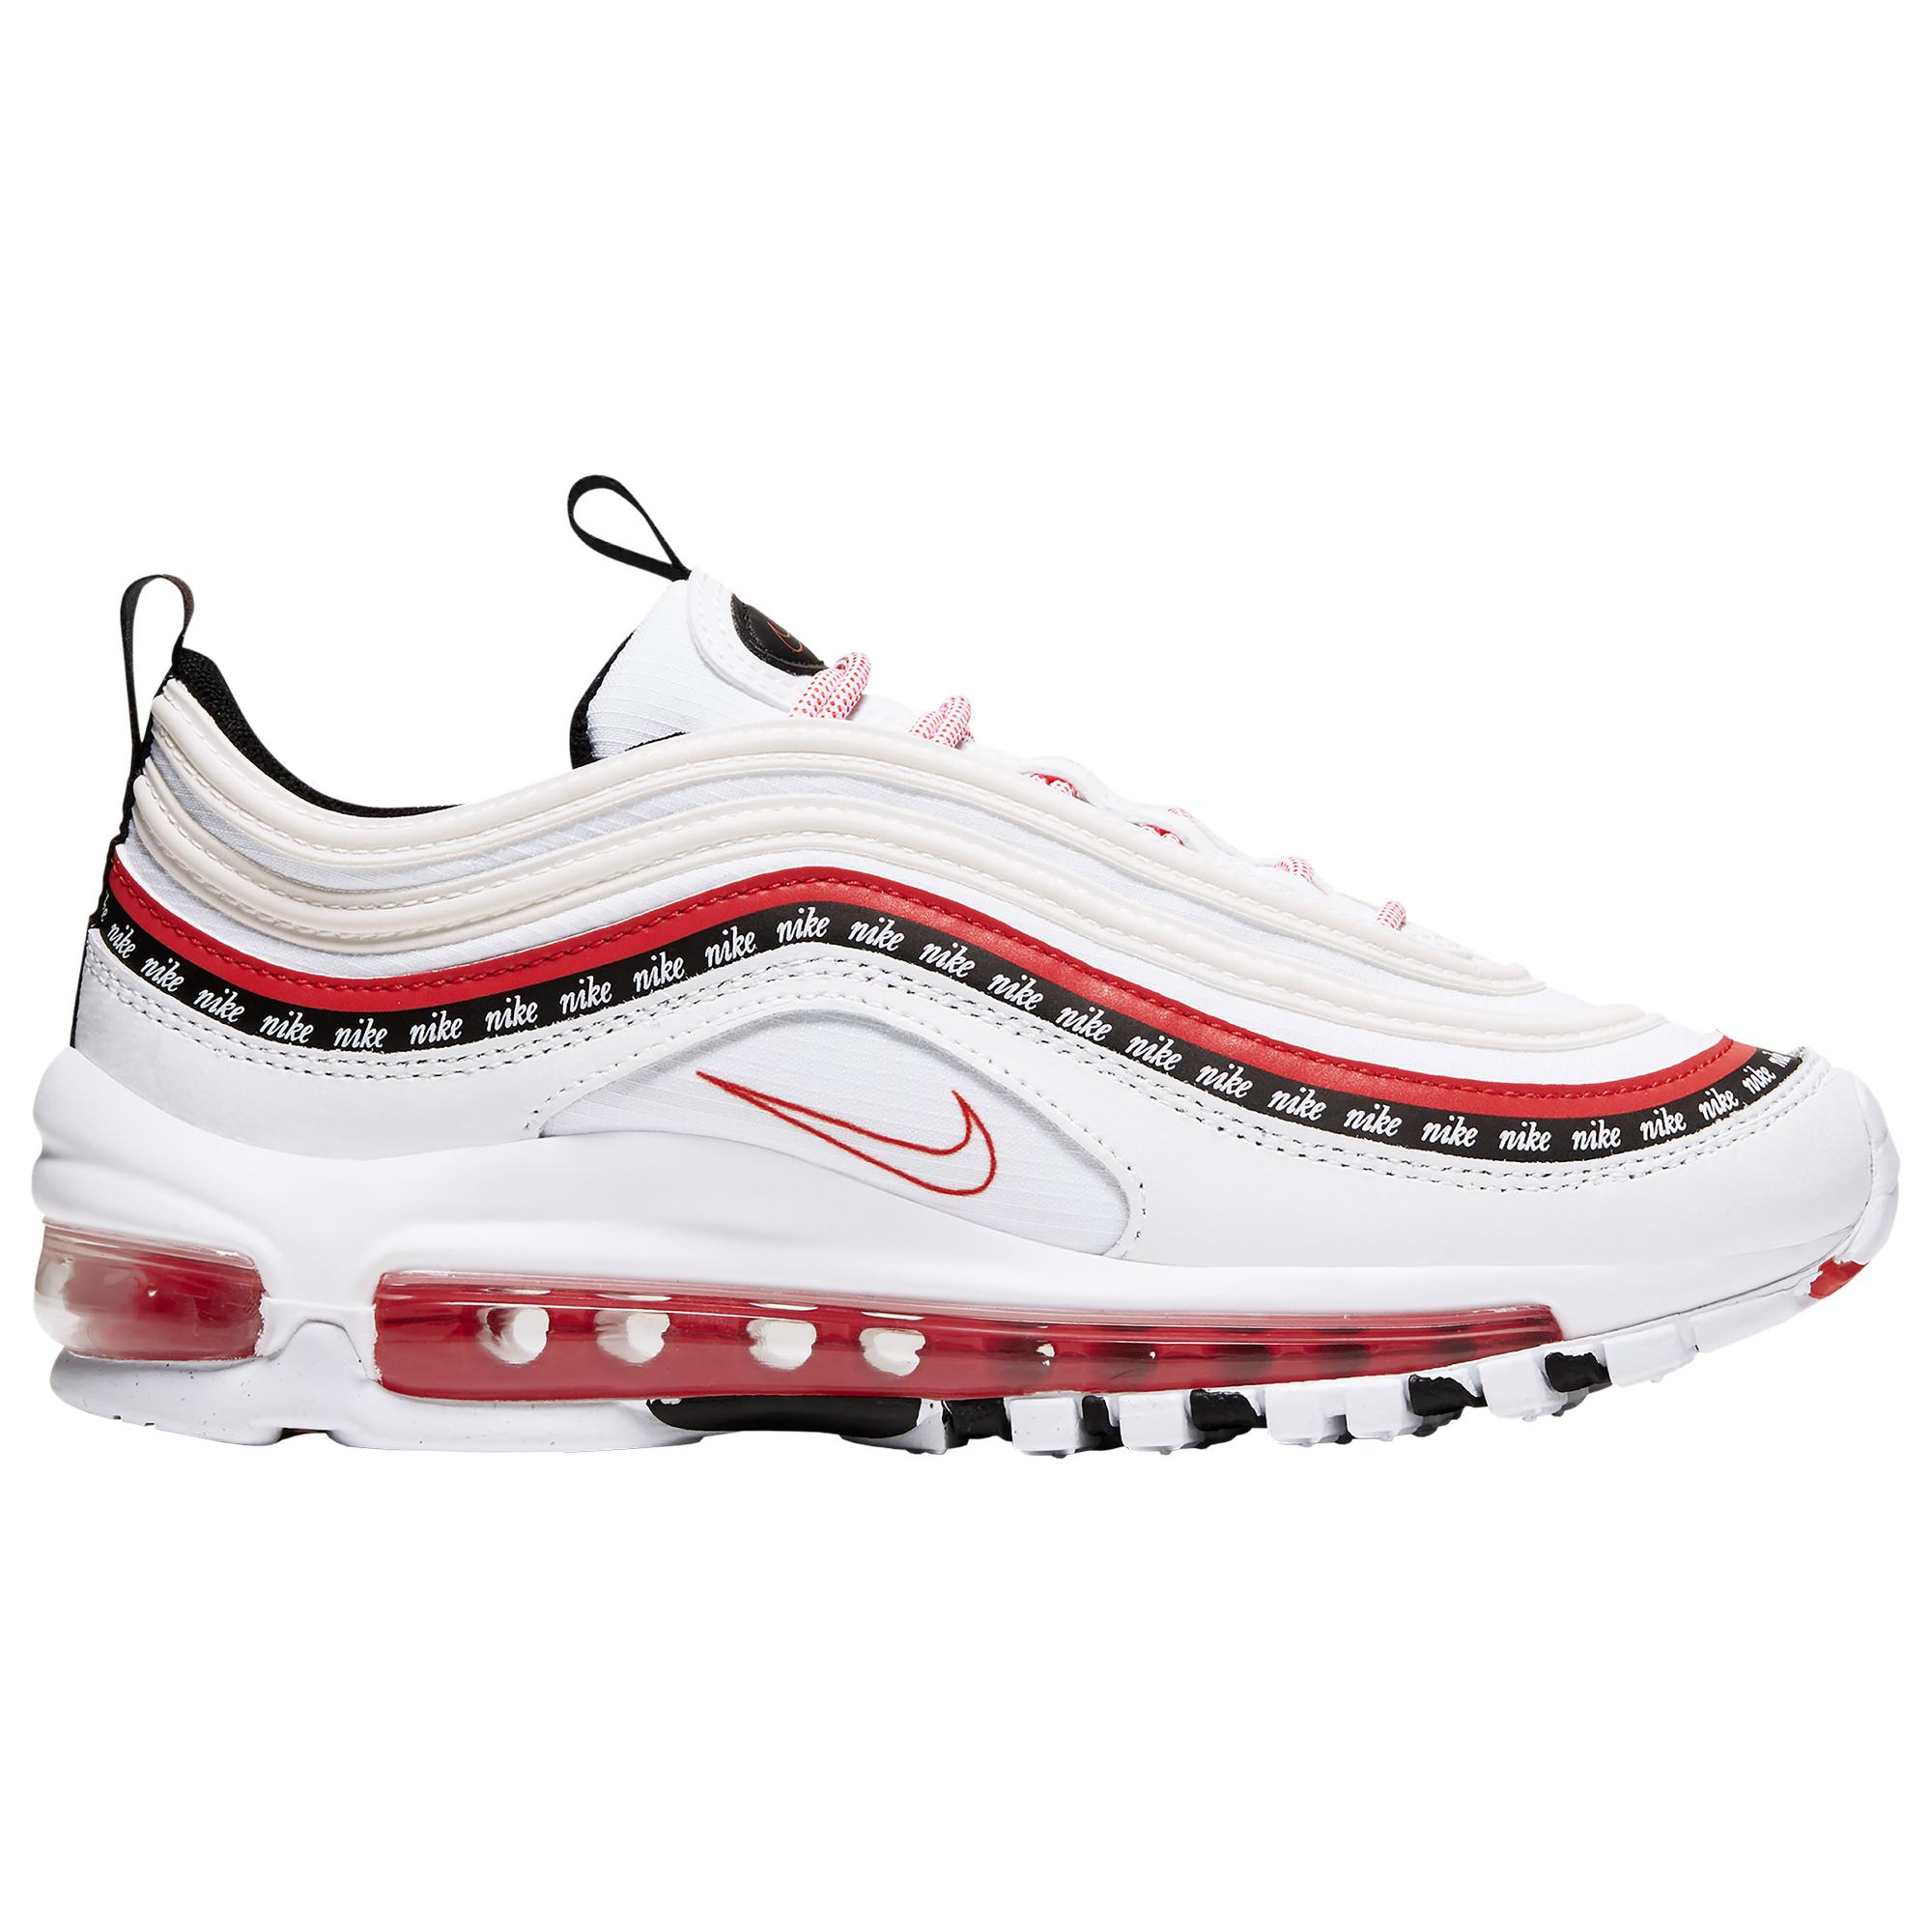 nike 97 red and white